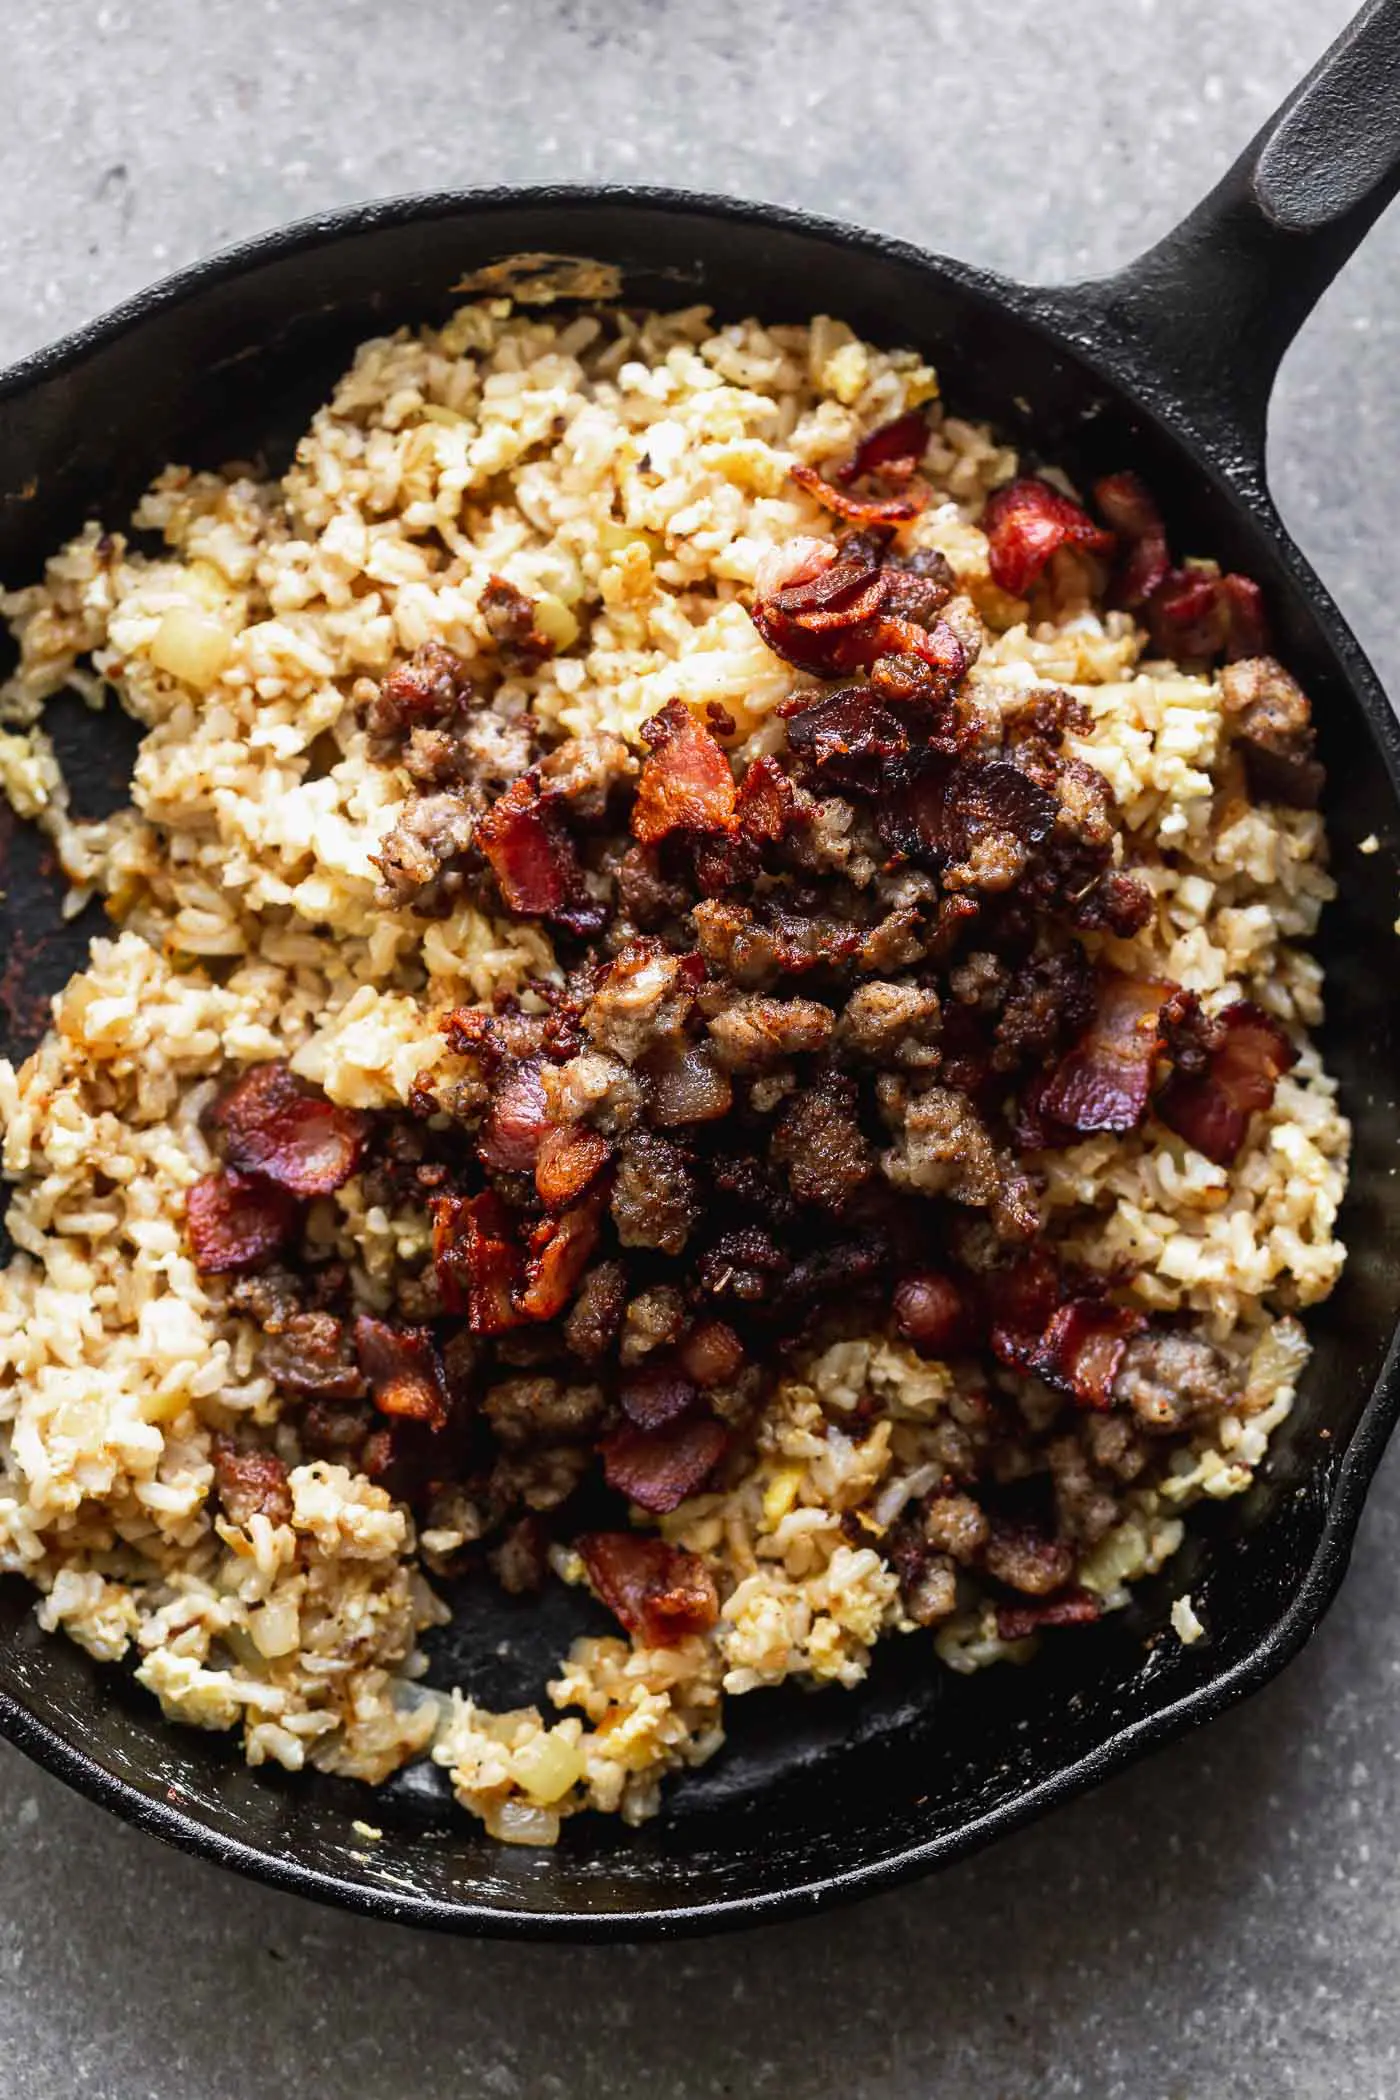 This Breakfast Fried Rice Recipe is packed with salty bacon and sausage, a light soy sauce, oniob, garlic, and plenty of hearty scrambled eggs. 